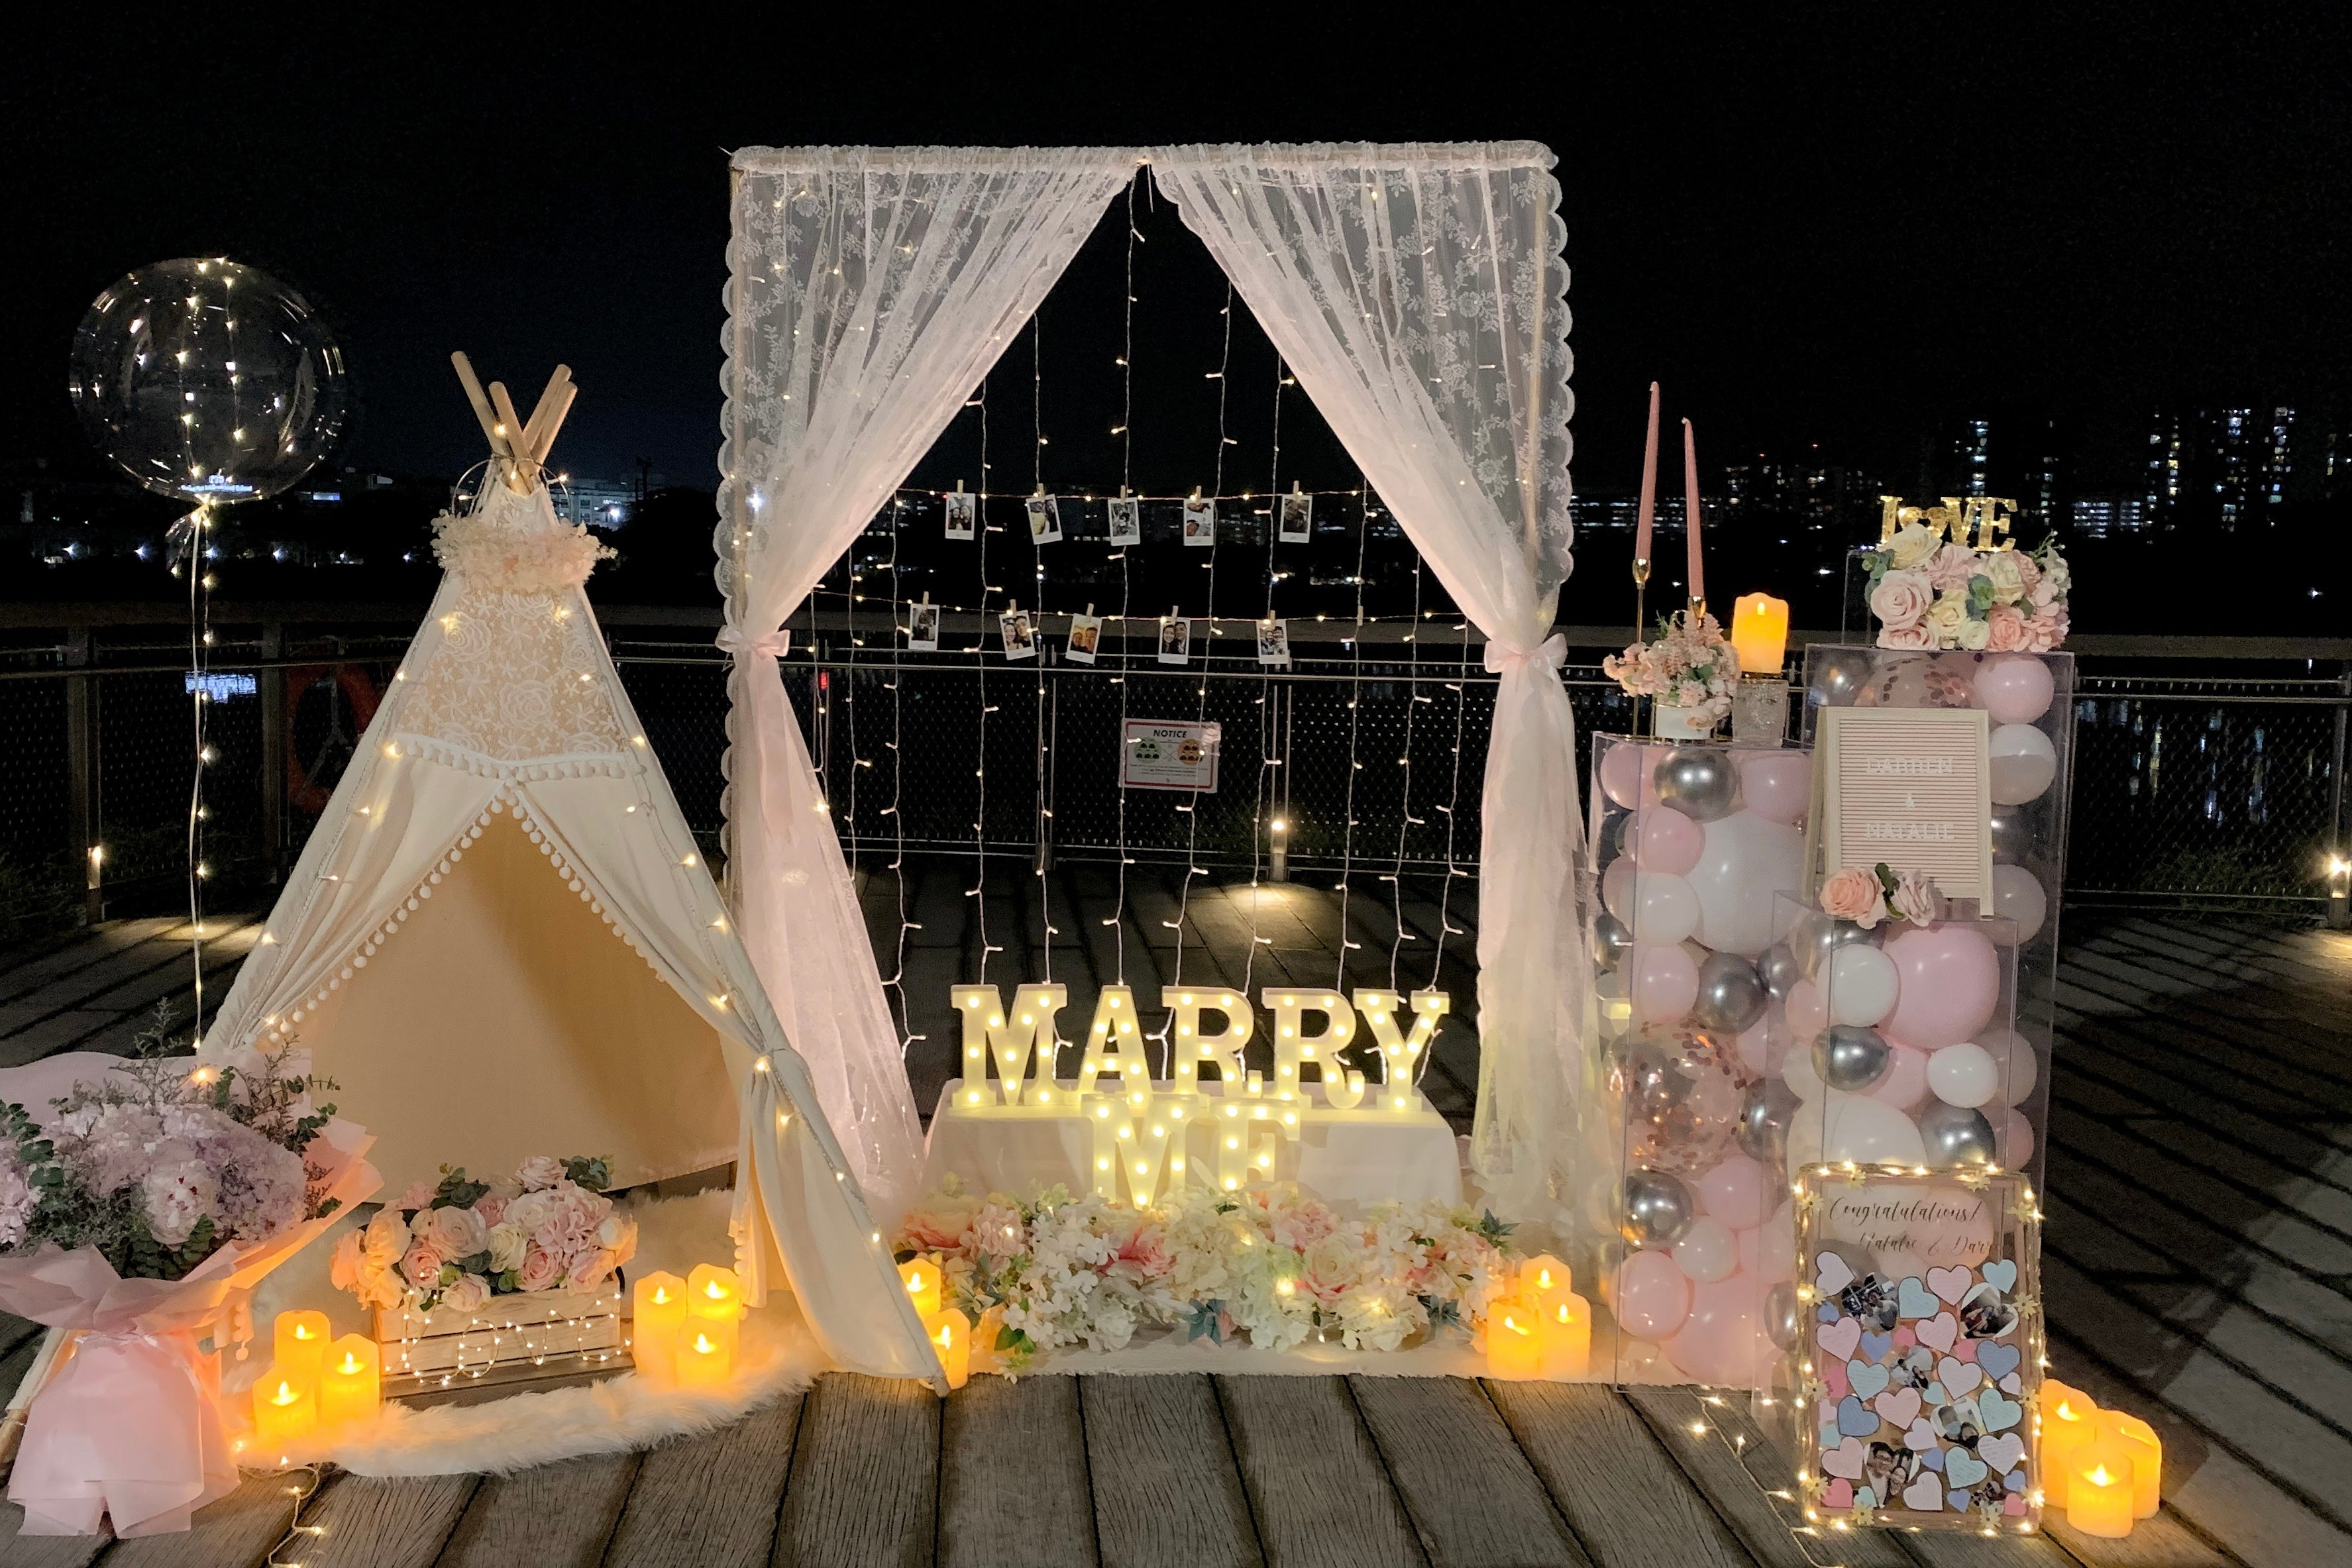 Romantic Outdoor Proposal Decor at Mount Faber Park Singapore with Fairylights, Balloons, Flowers and Teepee Tent by Style It Simply